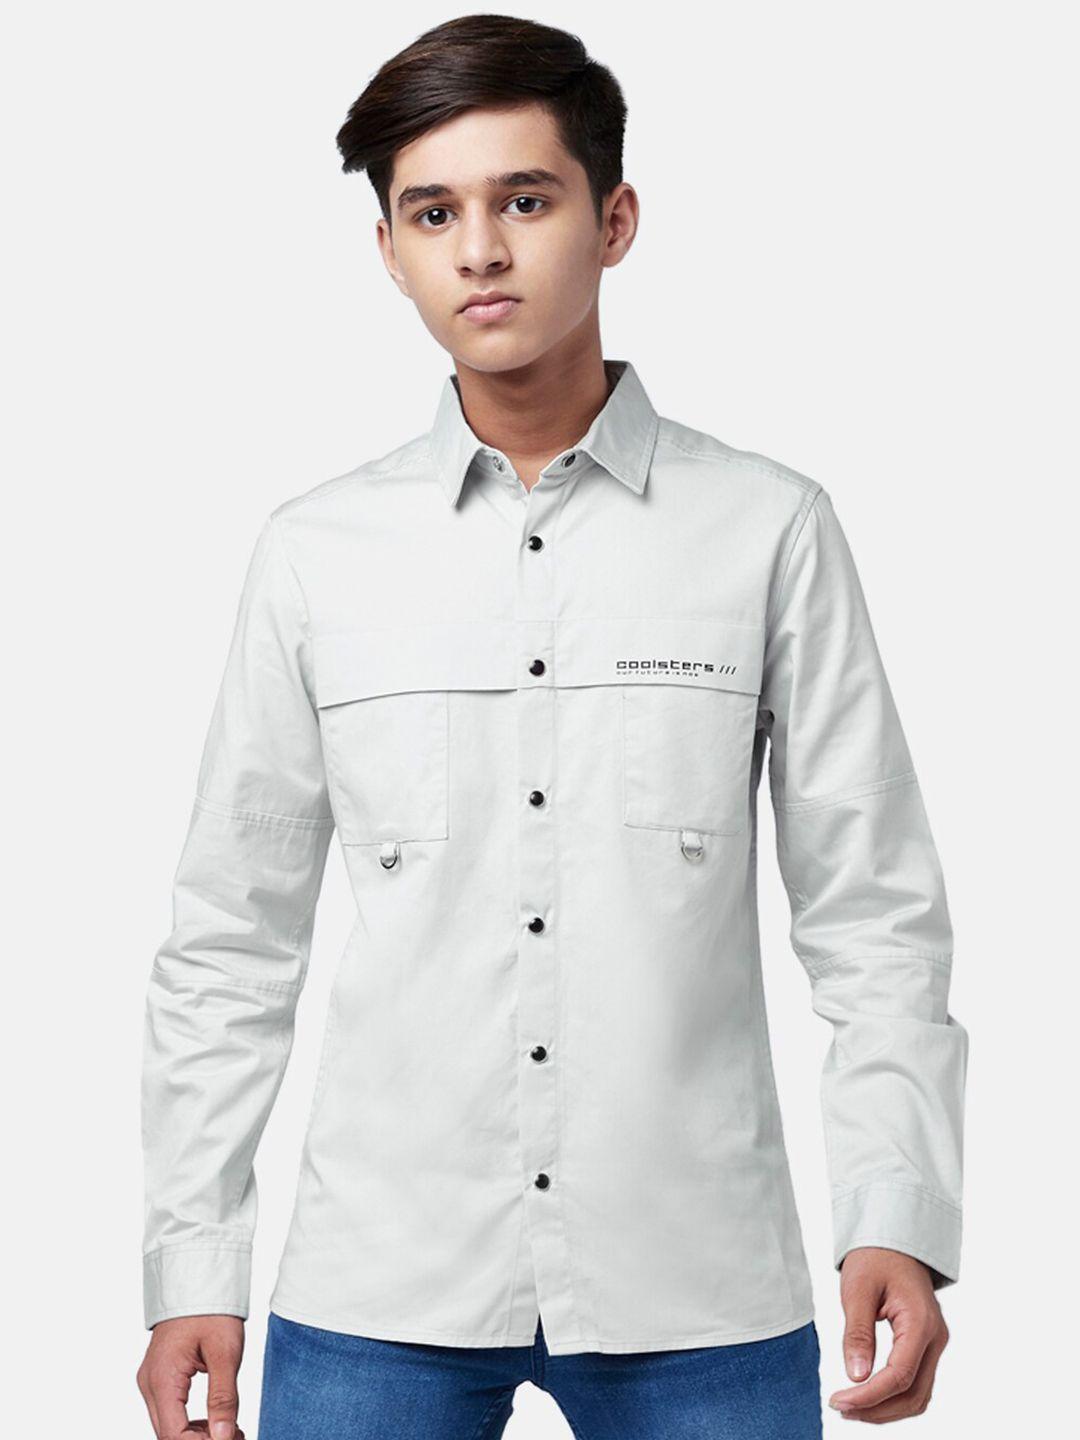 coolsters by pantaloons boys grey solid cotton casual shirt